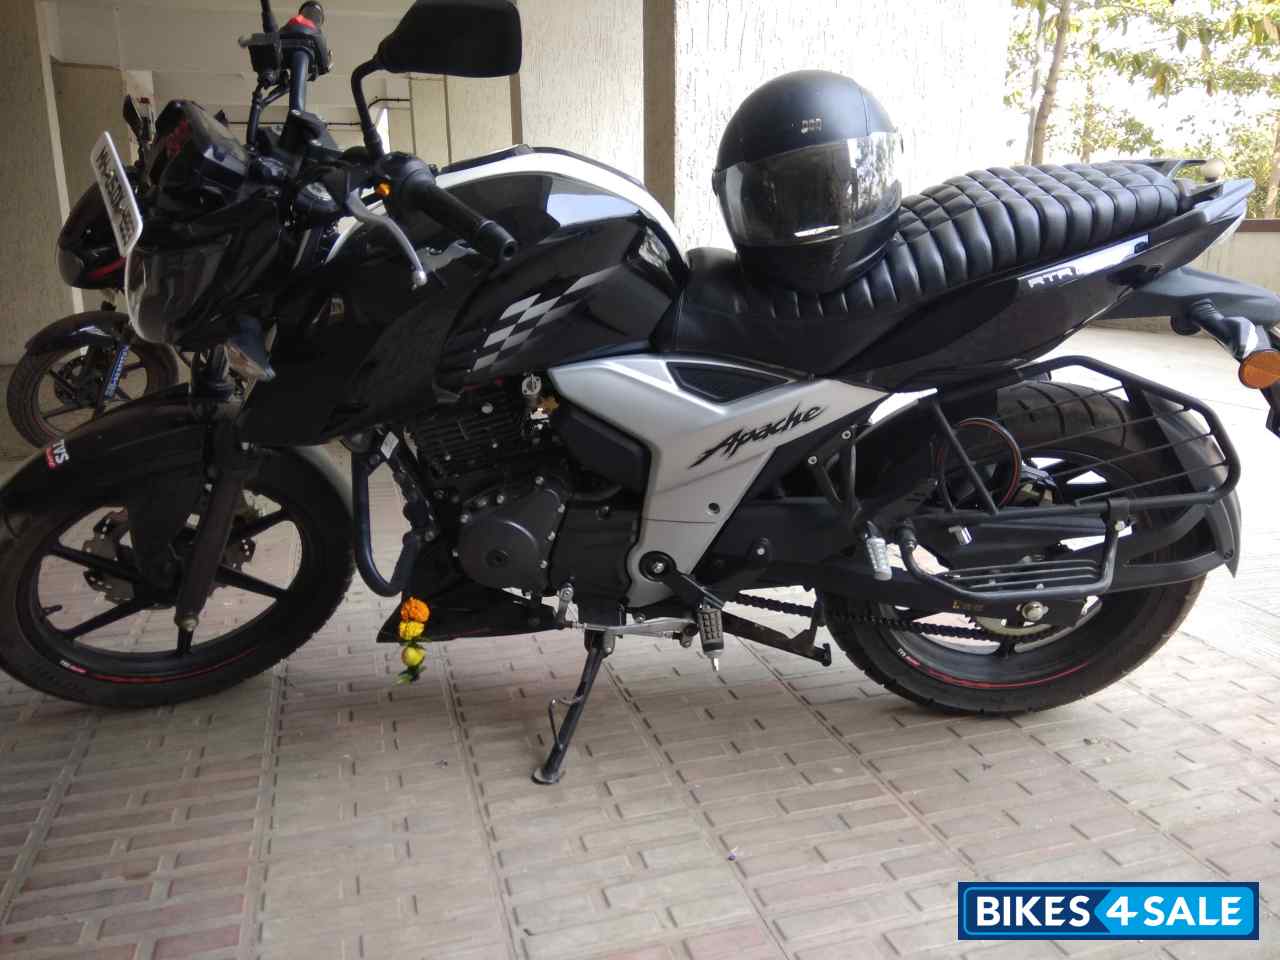 Used 2018 Model Tvs Apache Rtr 160 4v For Sale In Thane Id 211428 Bikes4sale